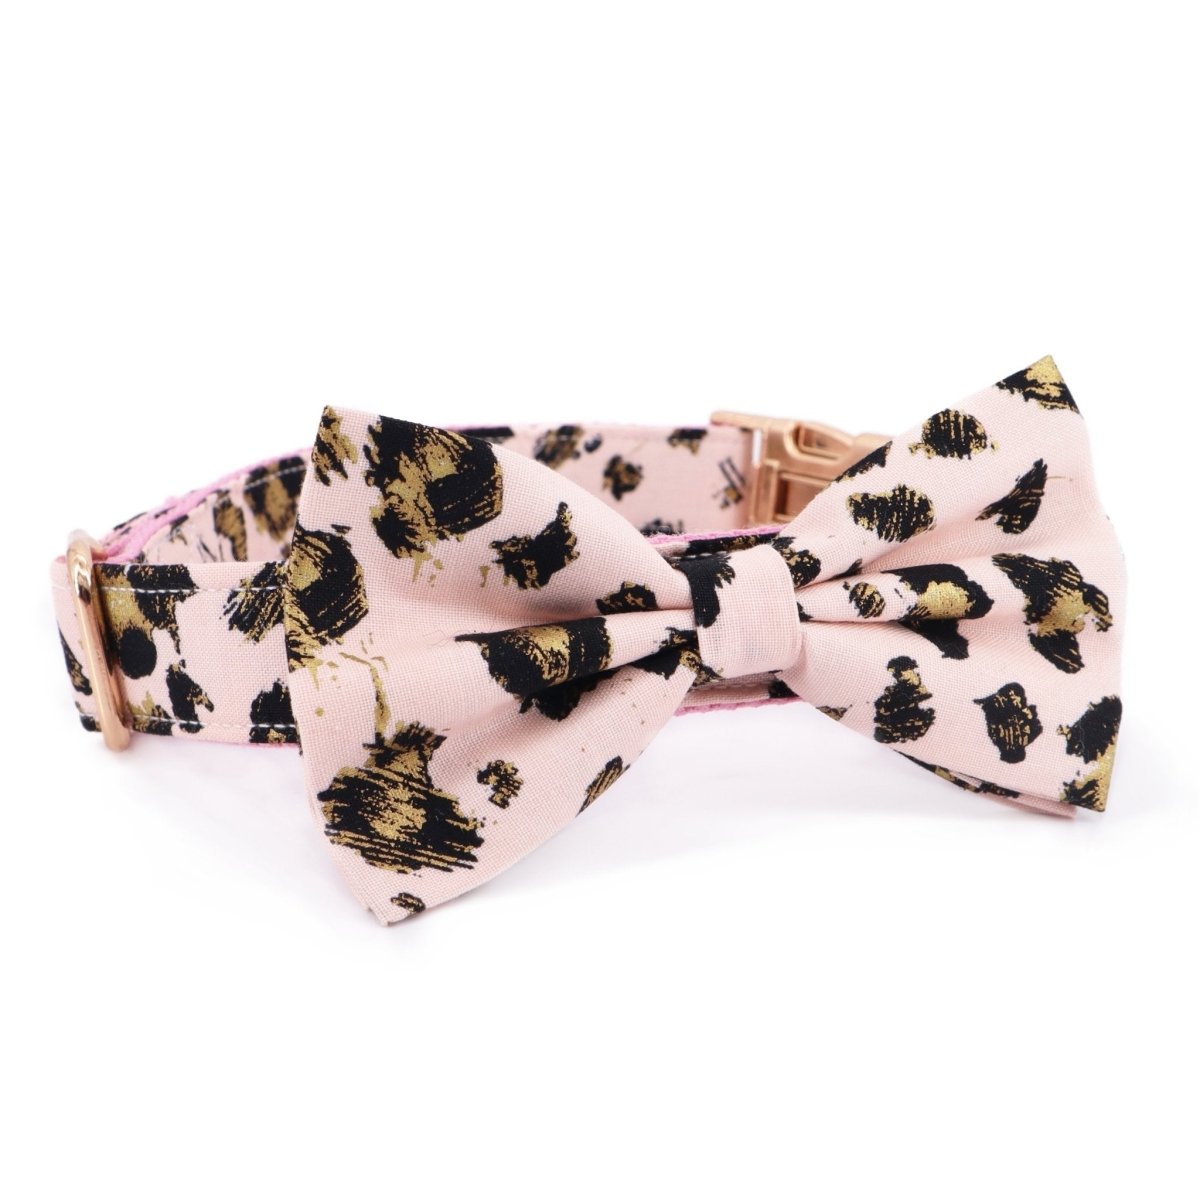 Cute & Super Safe Hardware Buckle Collar with Adorable Detachable Bows.  Beautiful Bowties Designs – Sniff & Bark